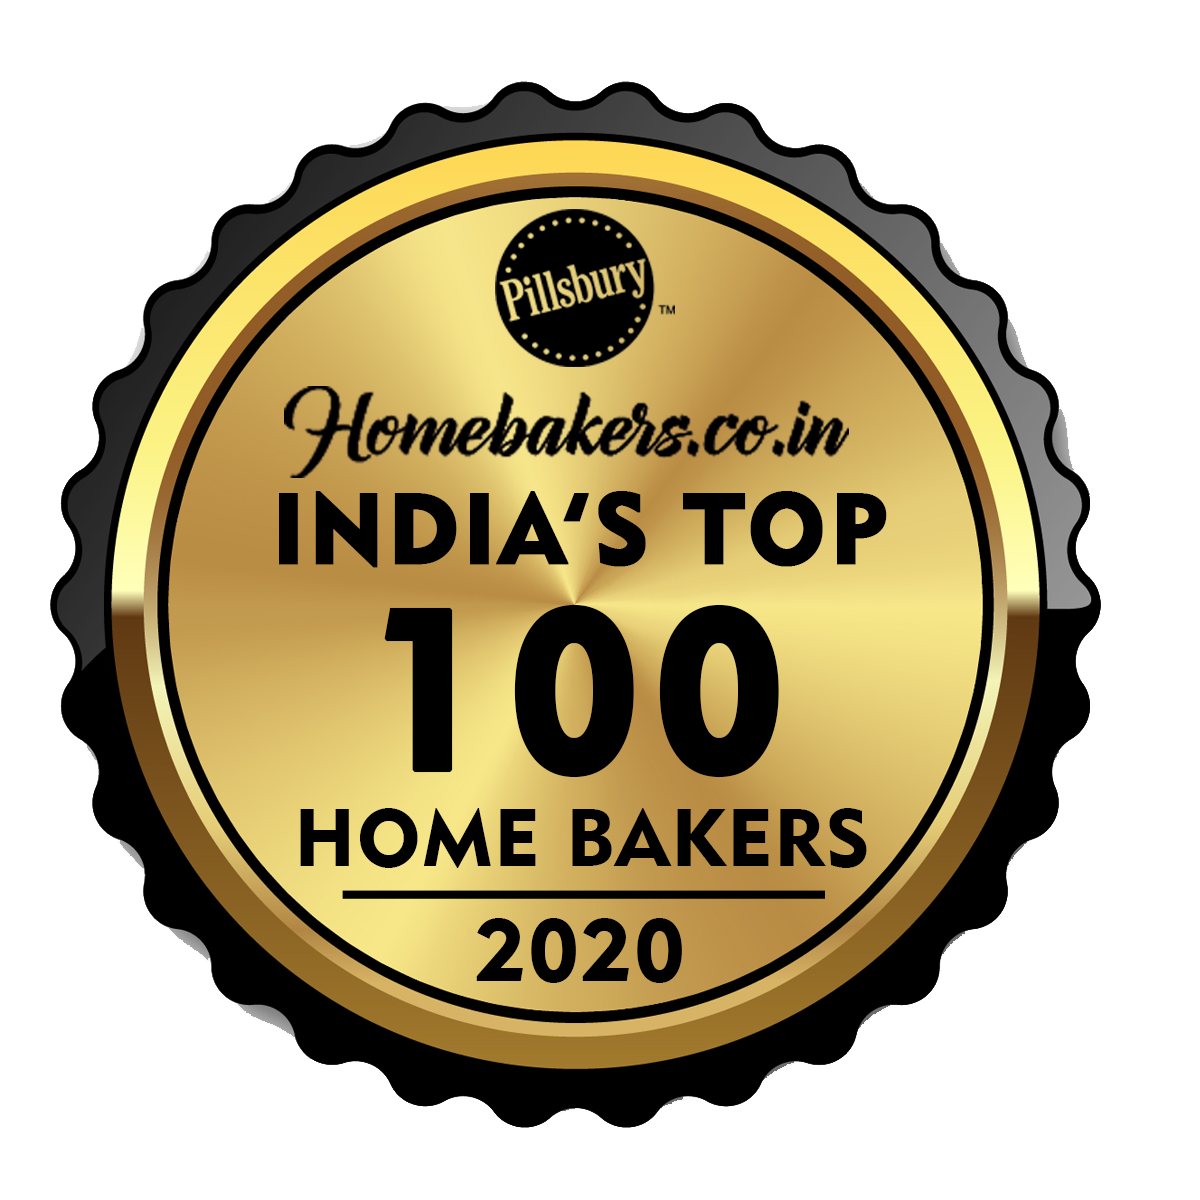 India's Top 100 Home Bakers